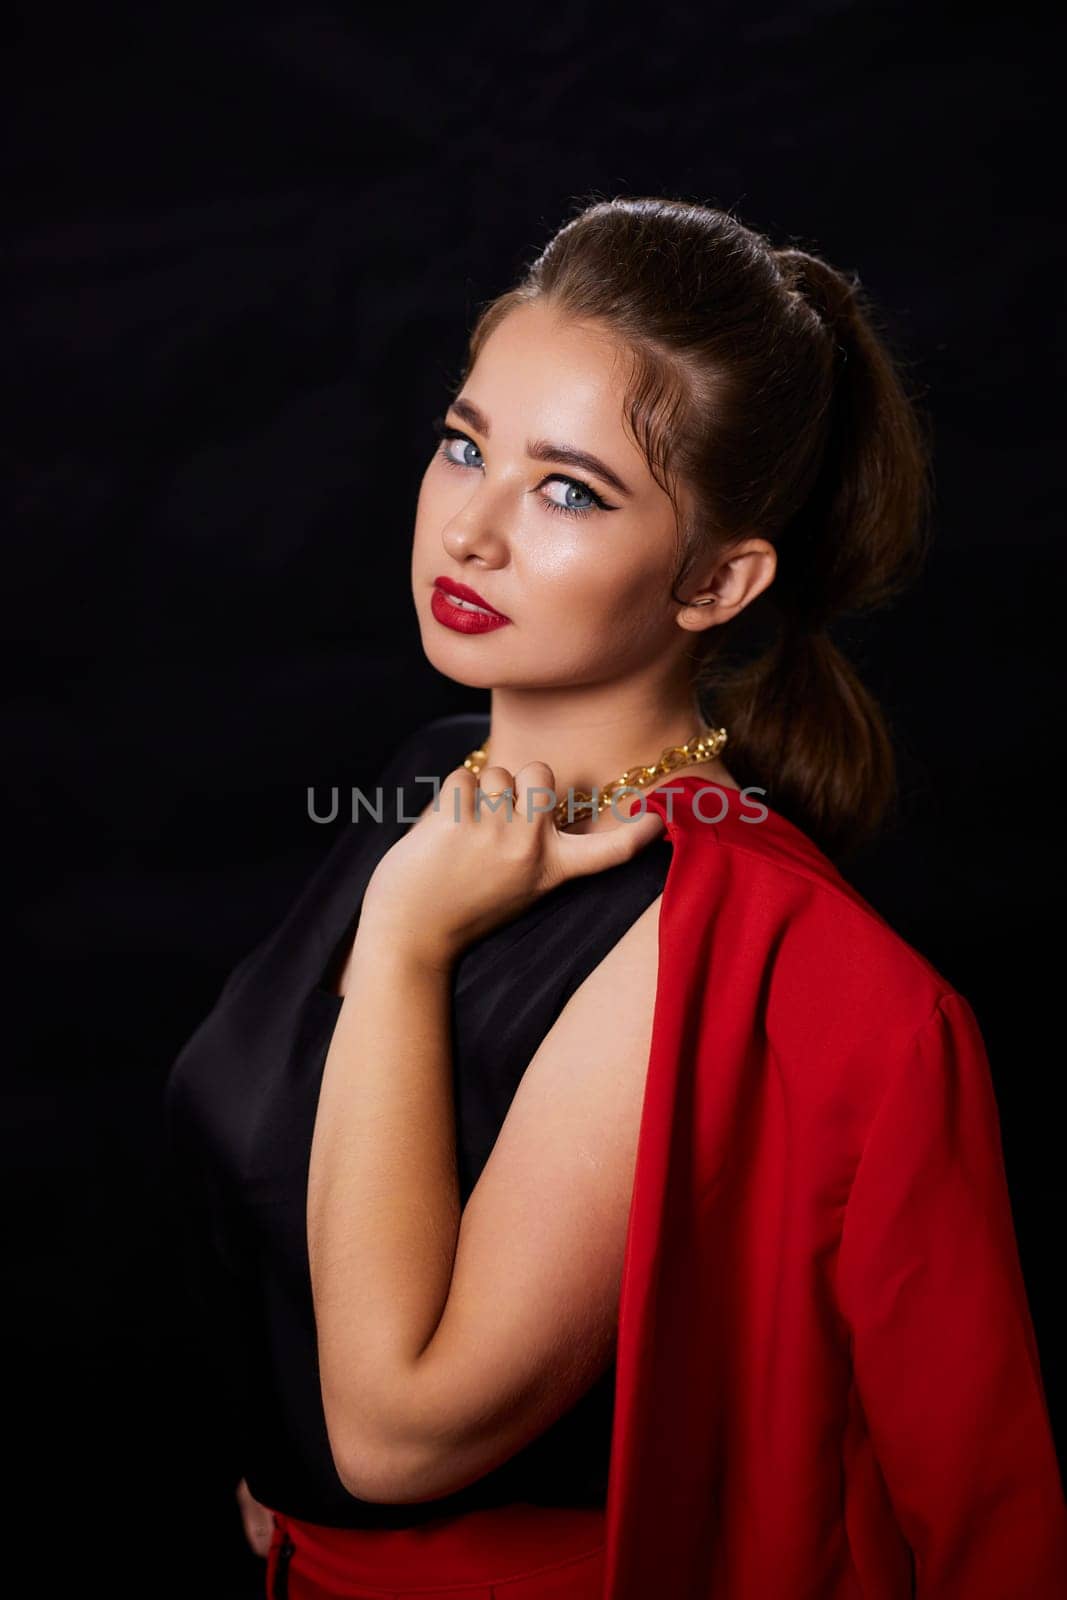 portrait shot of a young Ukrainian woman on the background, after make-up and hairstyle, for clothing advertising by mosfet_ua